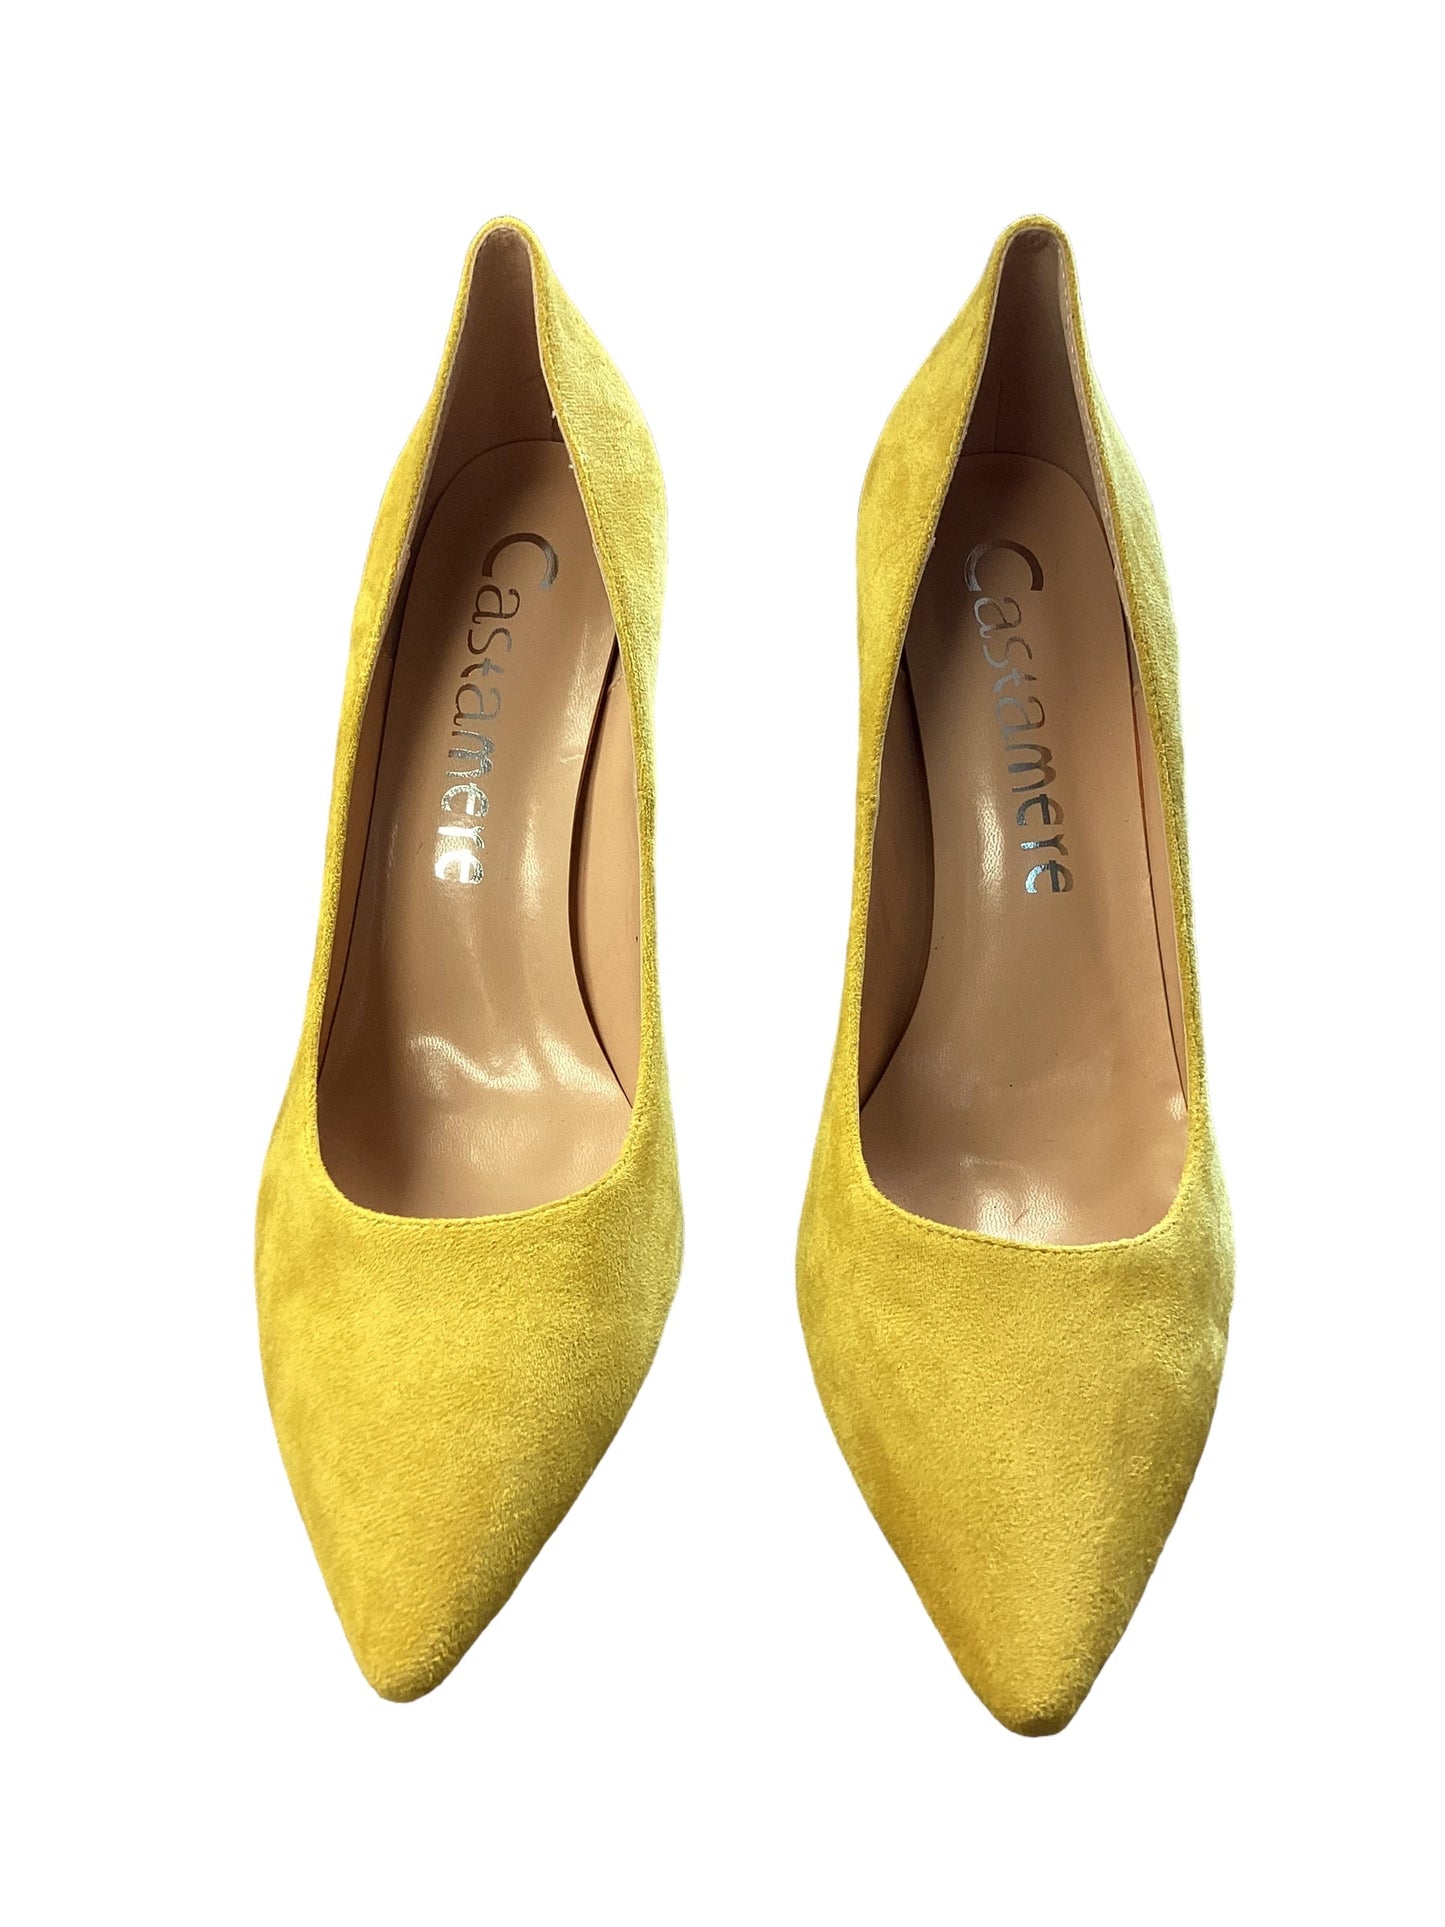 Yellow Shoes Heels Stiletto Clothes Mentor, Size 11